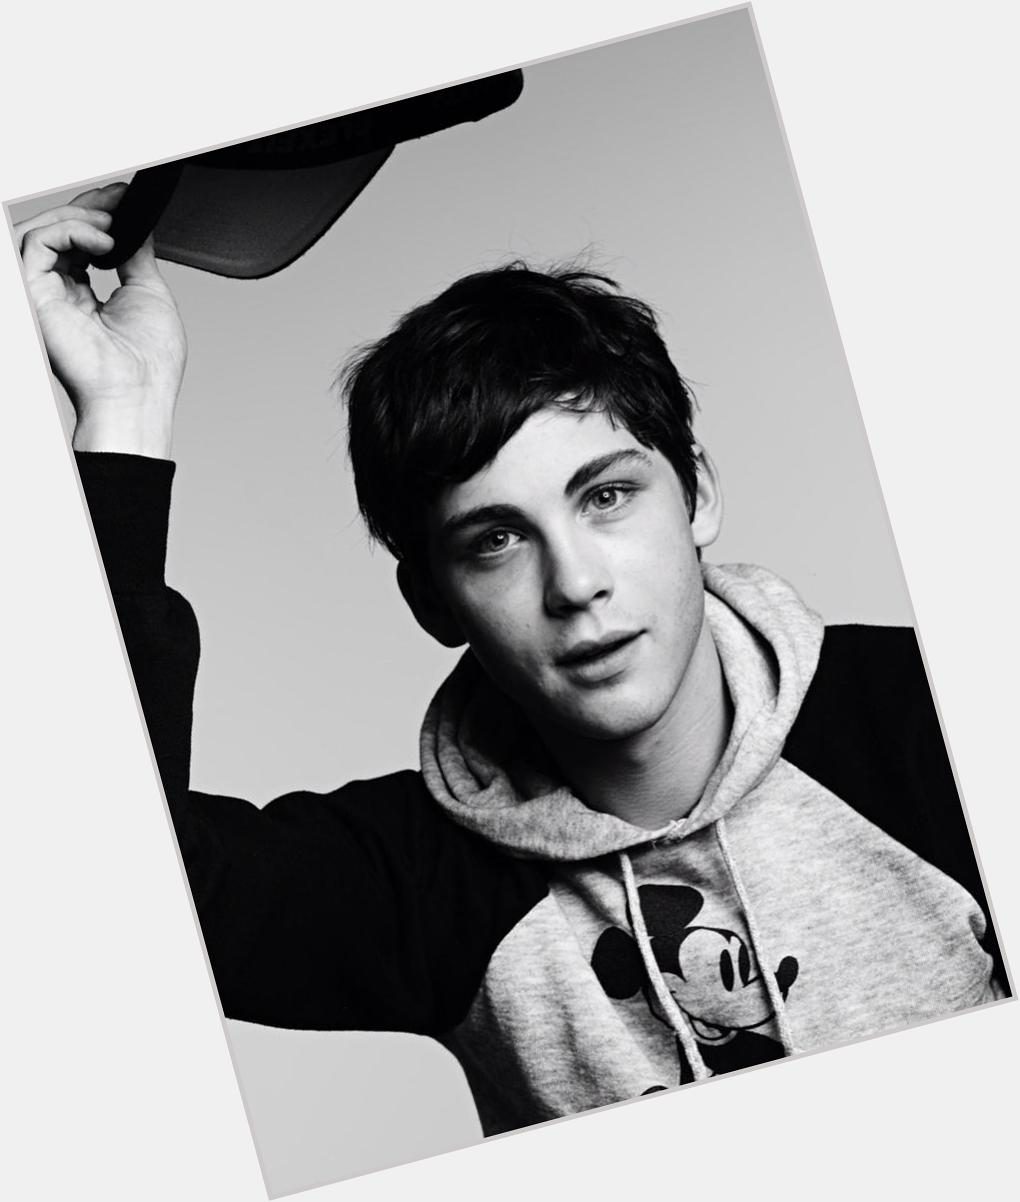 Happy Birthday to this little cute one, the amazing Logan Lerman 